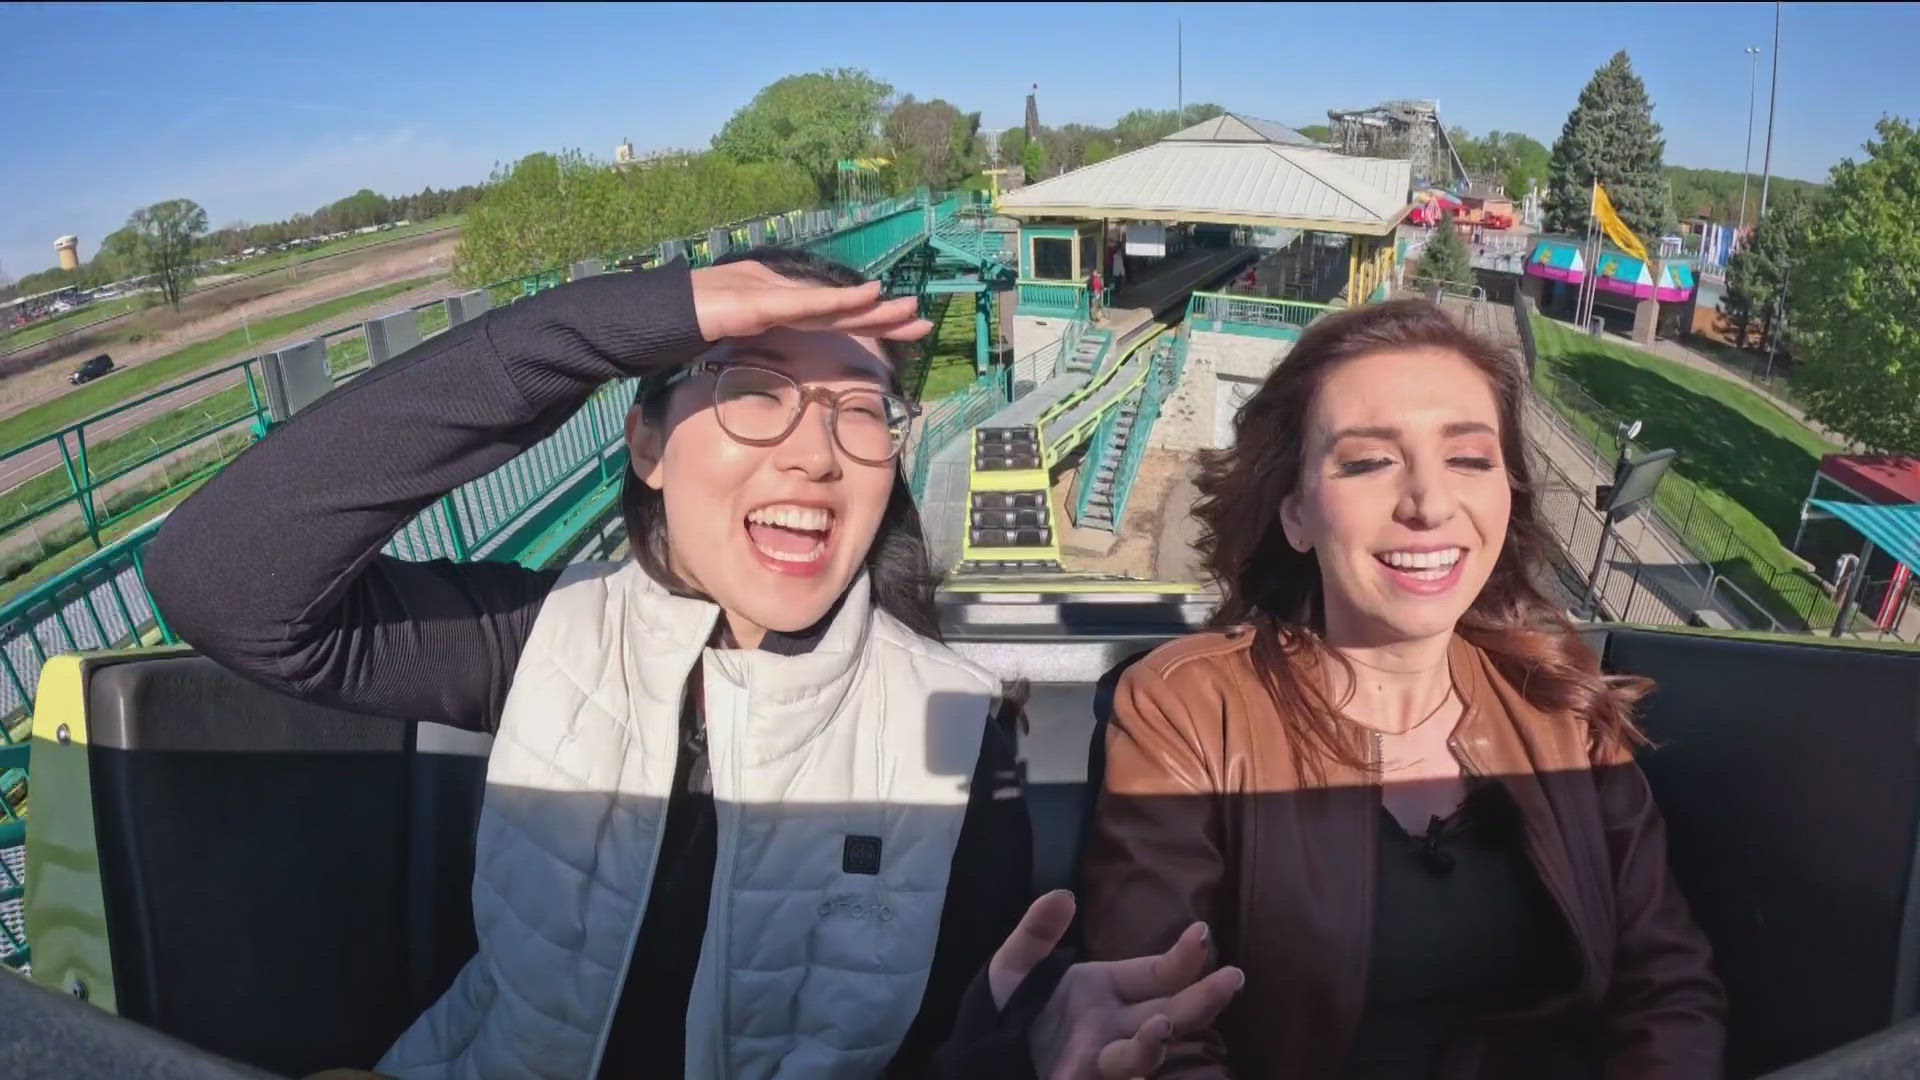 KARE 11 Sunrise reporters Michelle Baik and Audrey Russo rode the iconic coaster in Shakopee. Can you guess who liked it and who didn't?